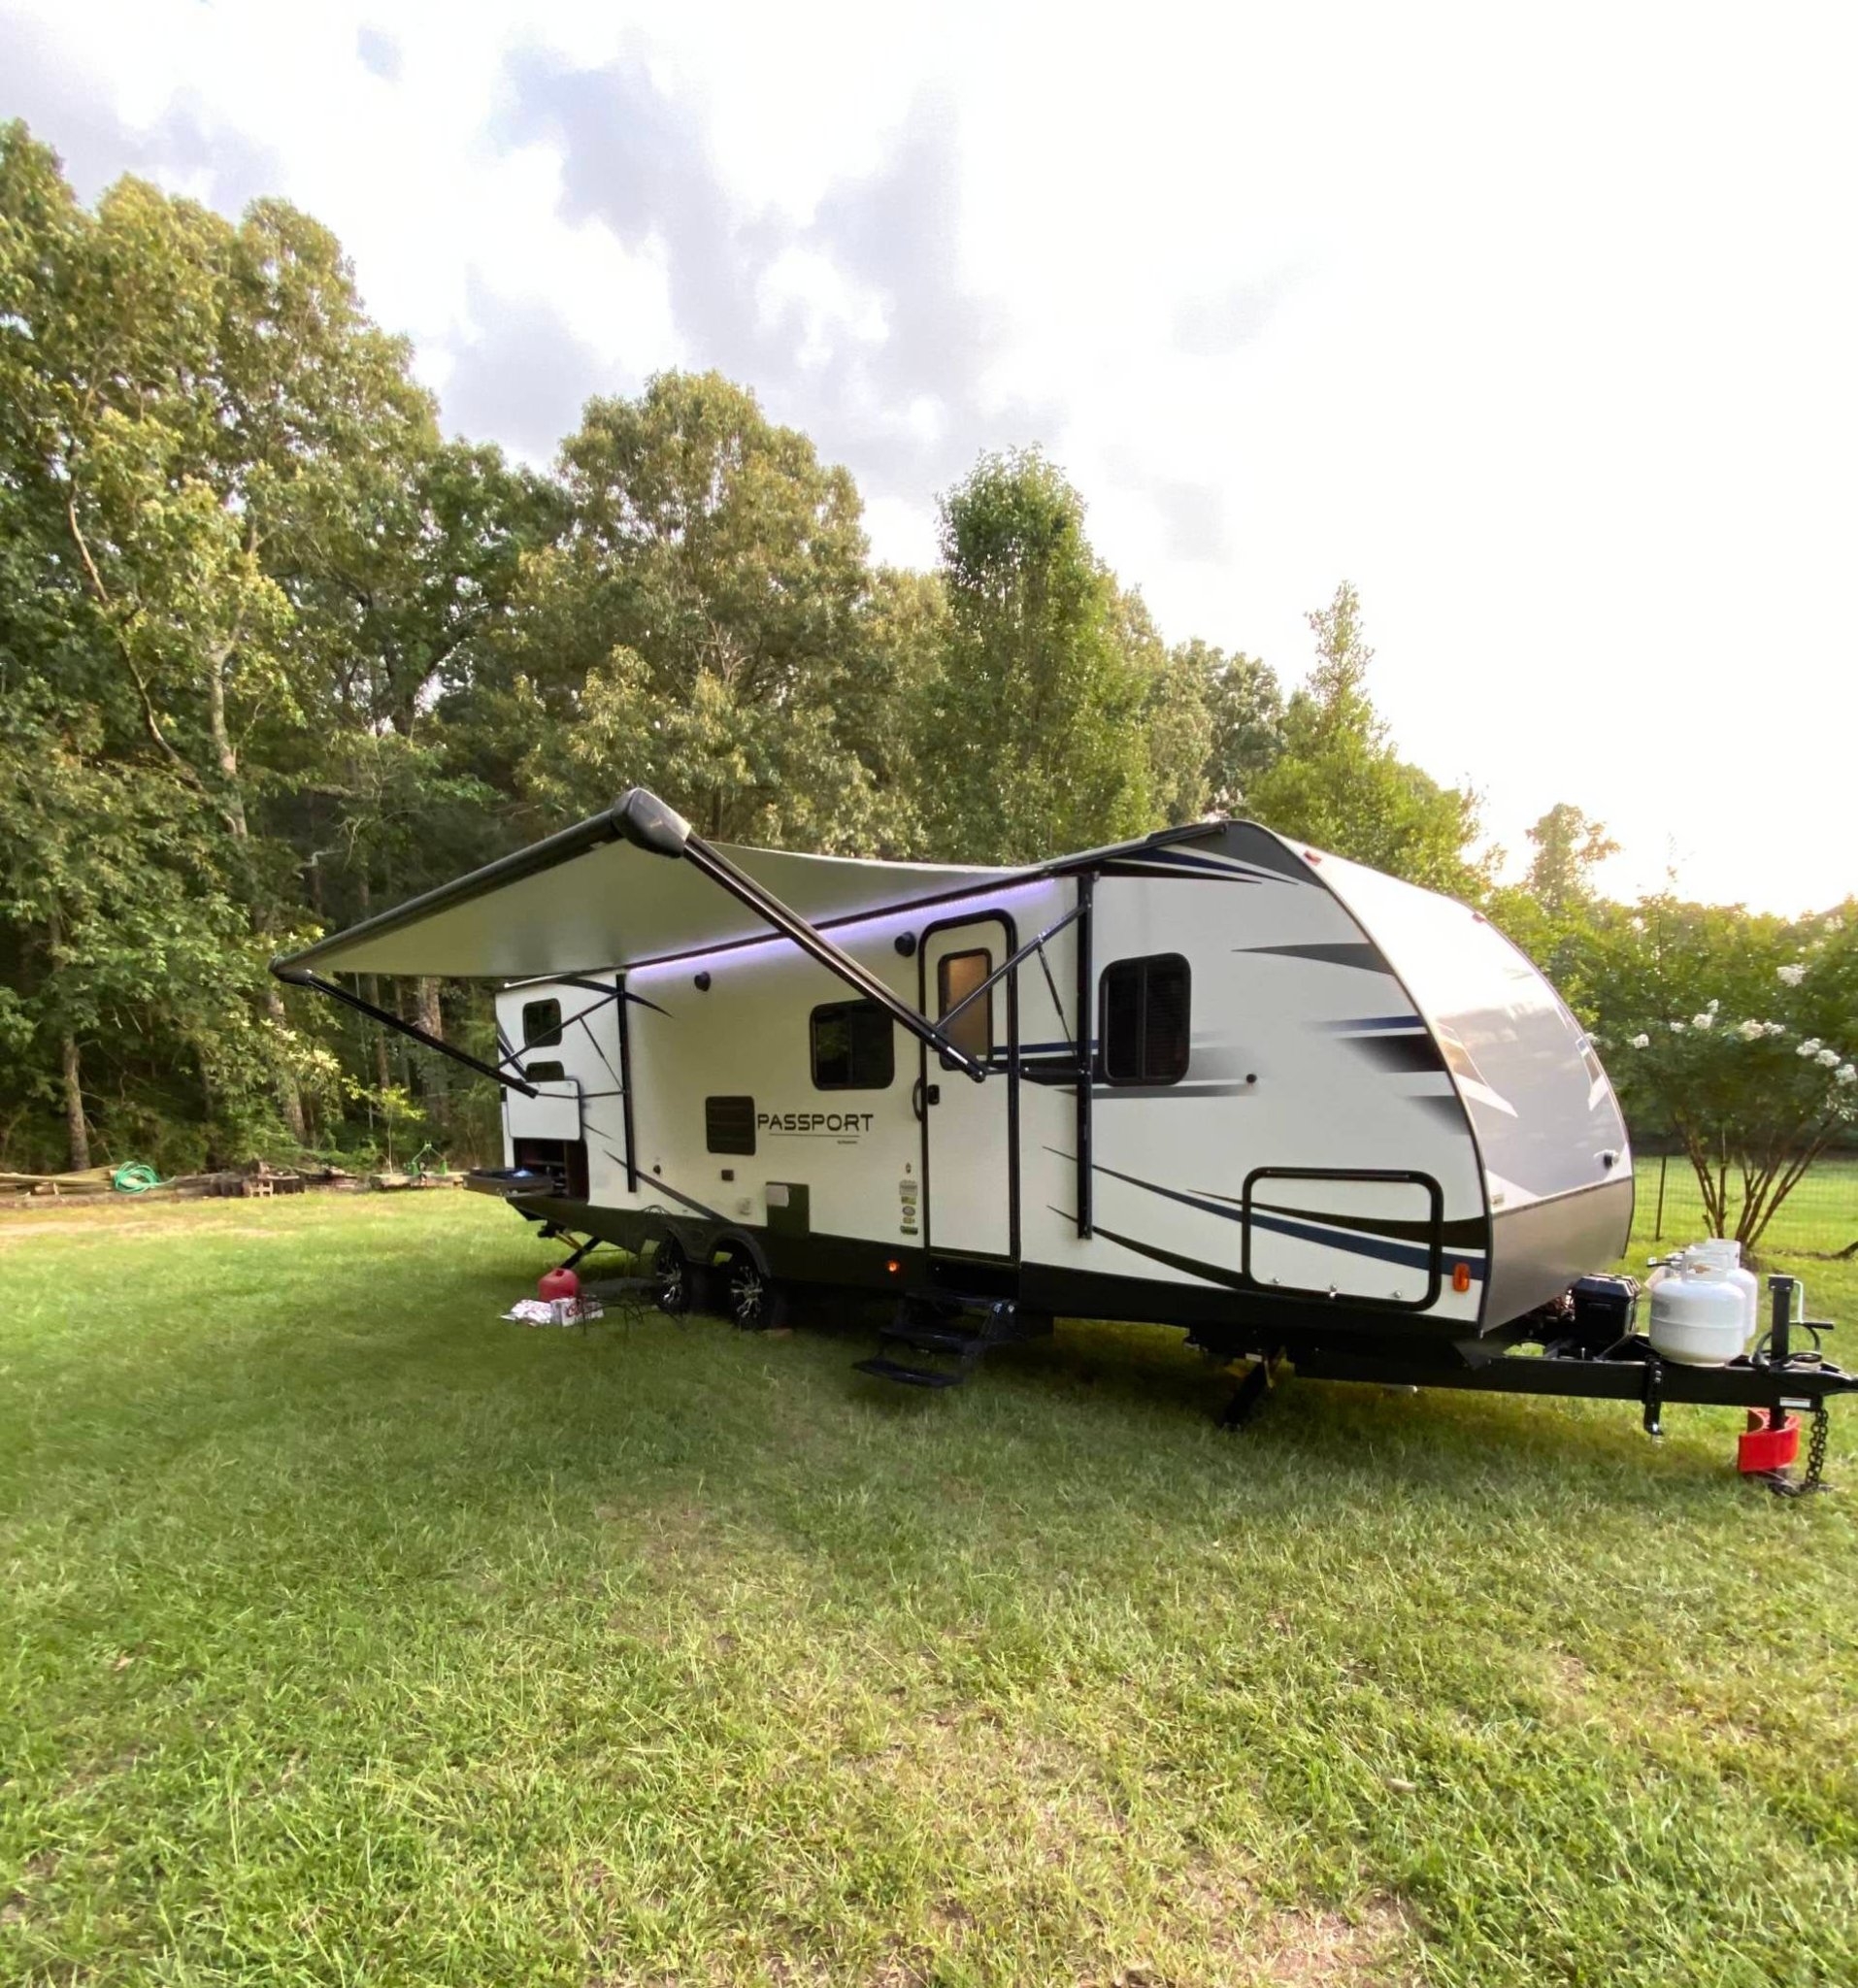 Don’t make these 5 mistakes when buying your first RV